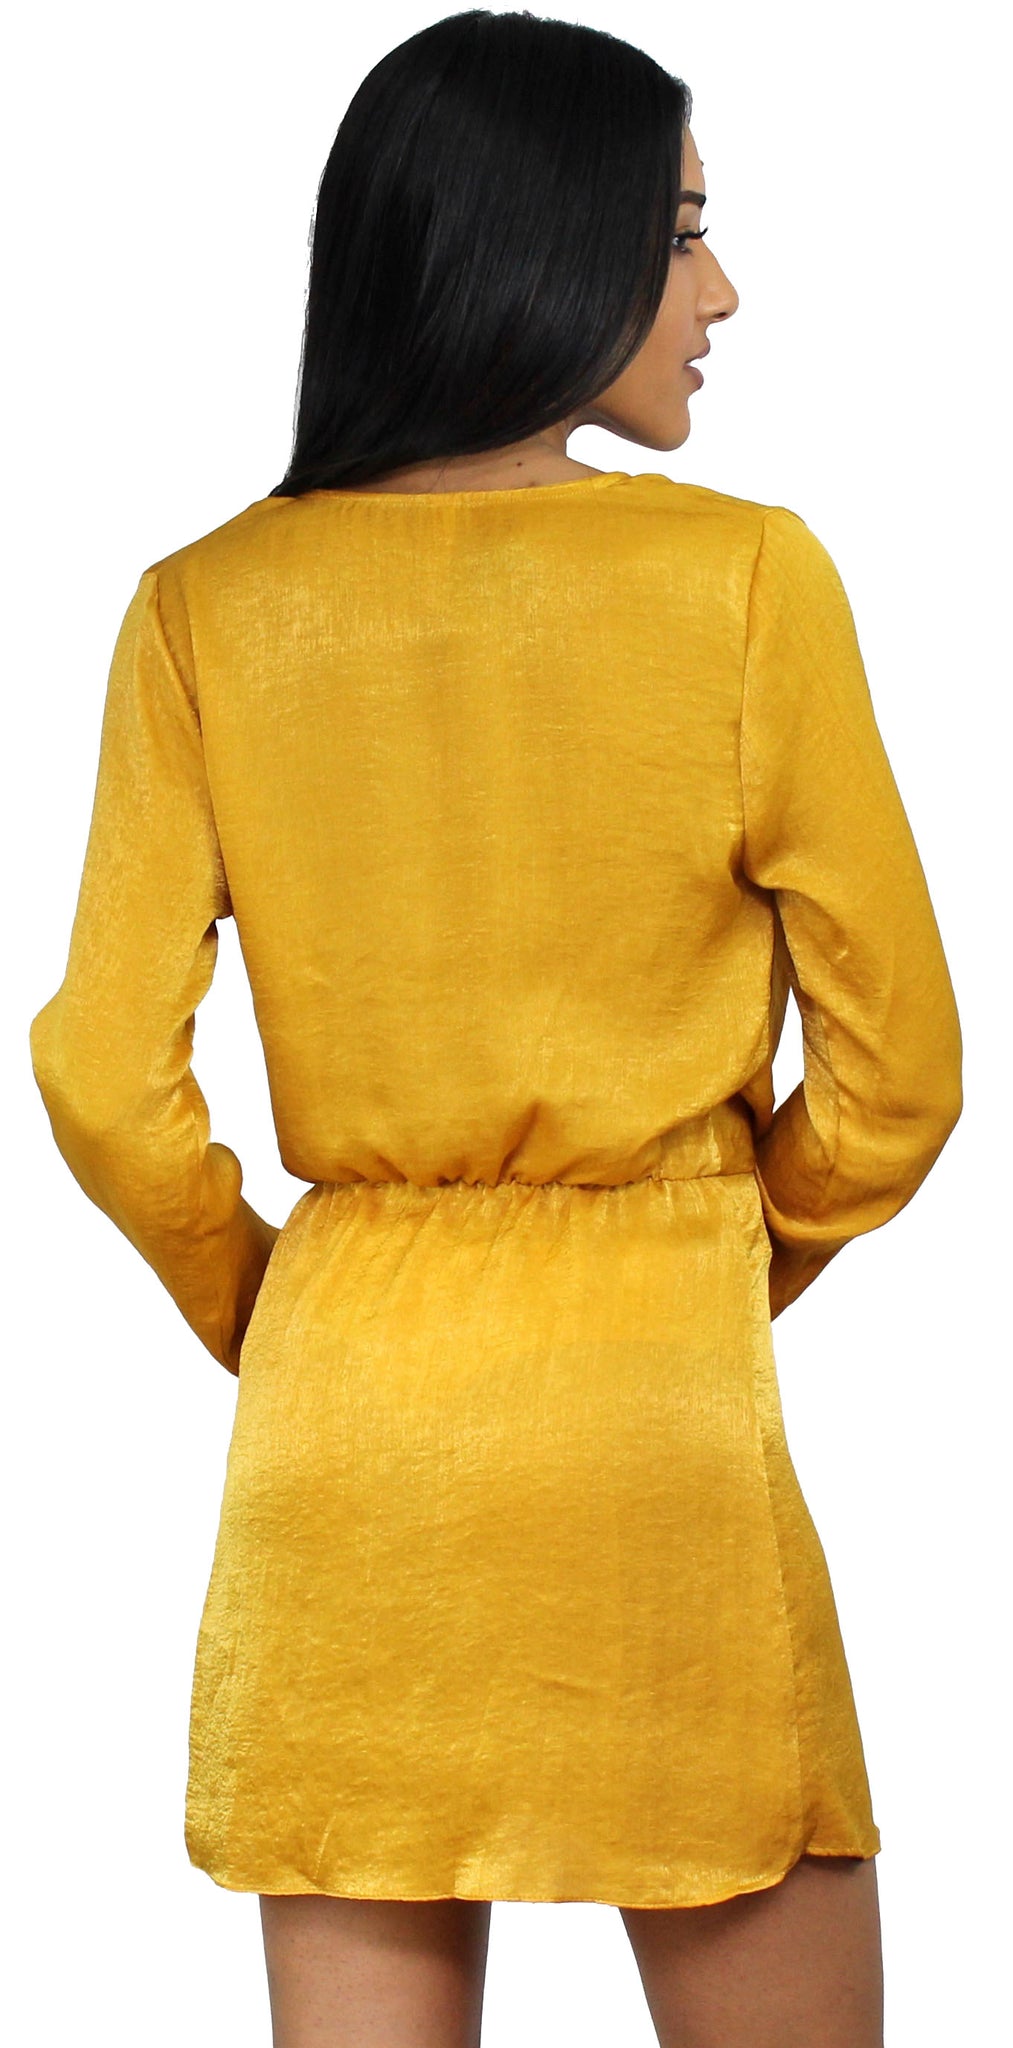 Get Kylie's Look with Mustard Satin Dress